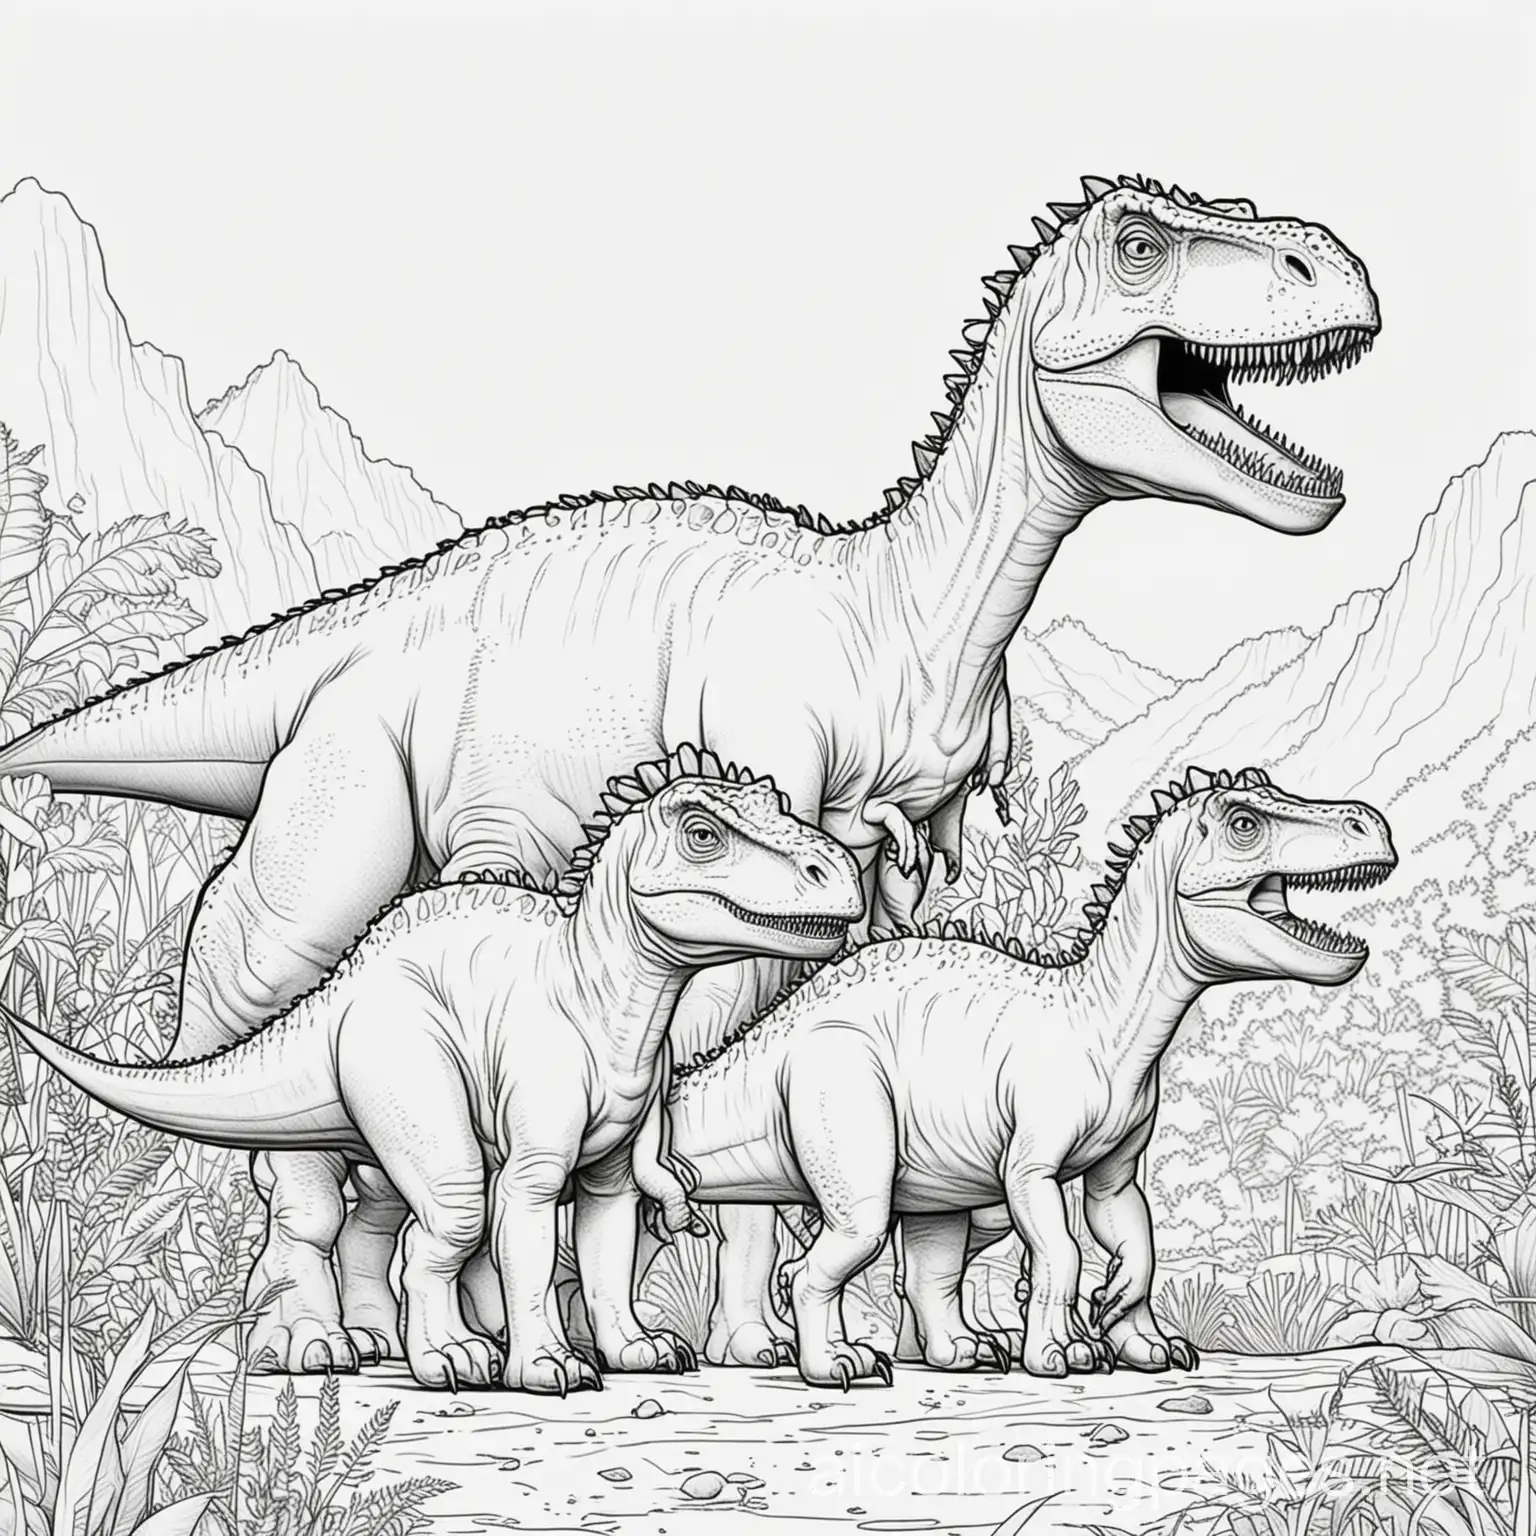 a family of dinosaurs, Coloring Page, black and white, line art, white background, Simplicity, Ample White Space. The background of the coloring page is plain white to make it easy for young children to color within the lines. The outlines of all the subjects are easy to distinguish, making it simple for kids to color without too much difficulty